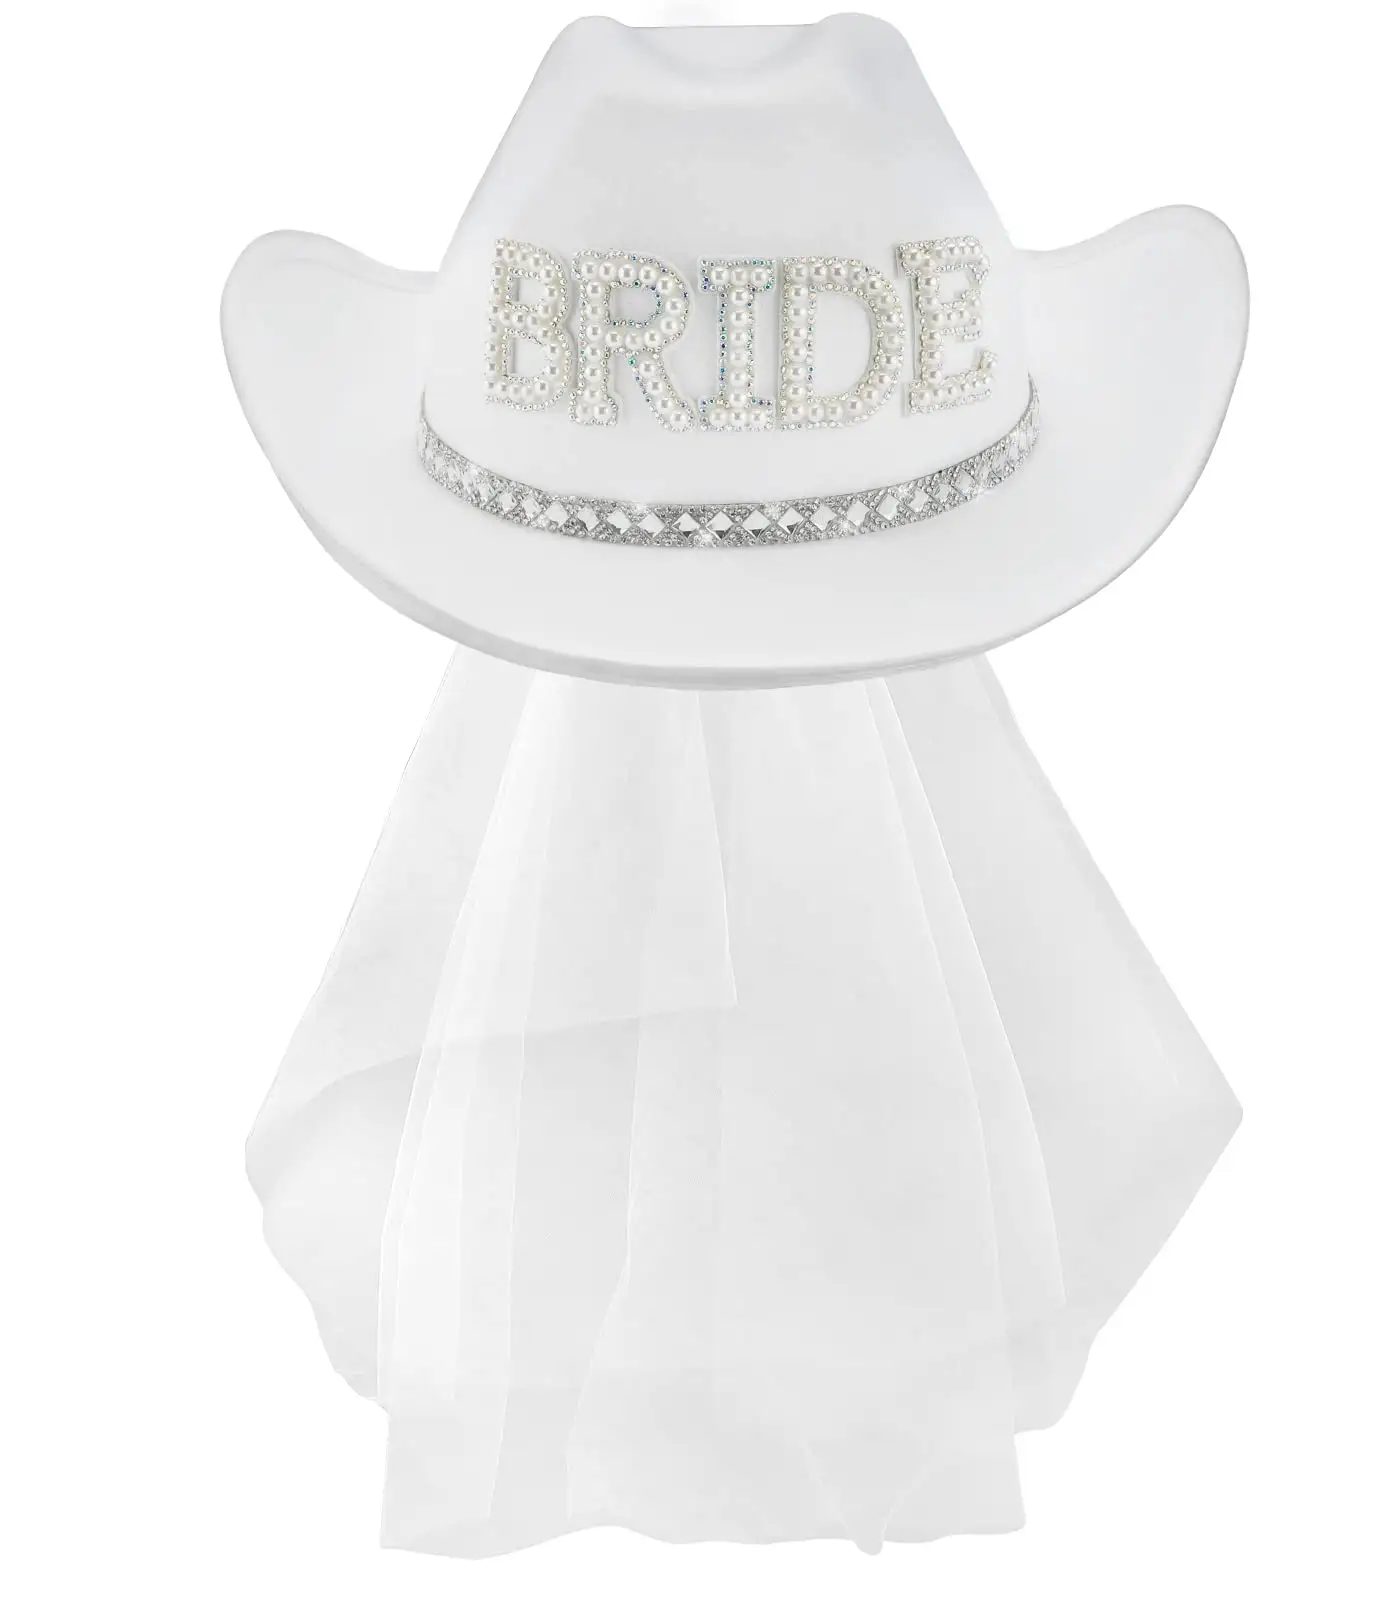 Bridal Cowgirl Hat for Bachelorette Party Rhinestone White Cowboy Hat for Women Bride To Be Gift Halloween Costume Y936